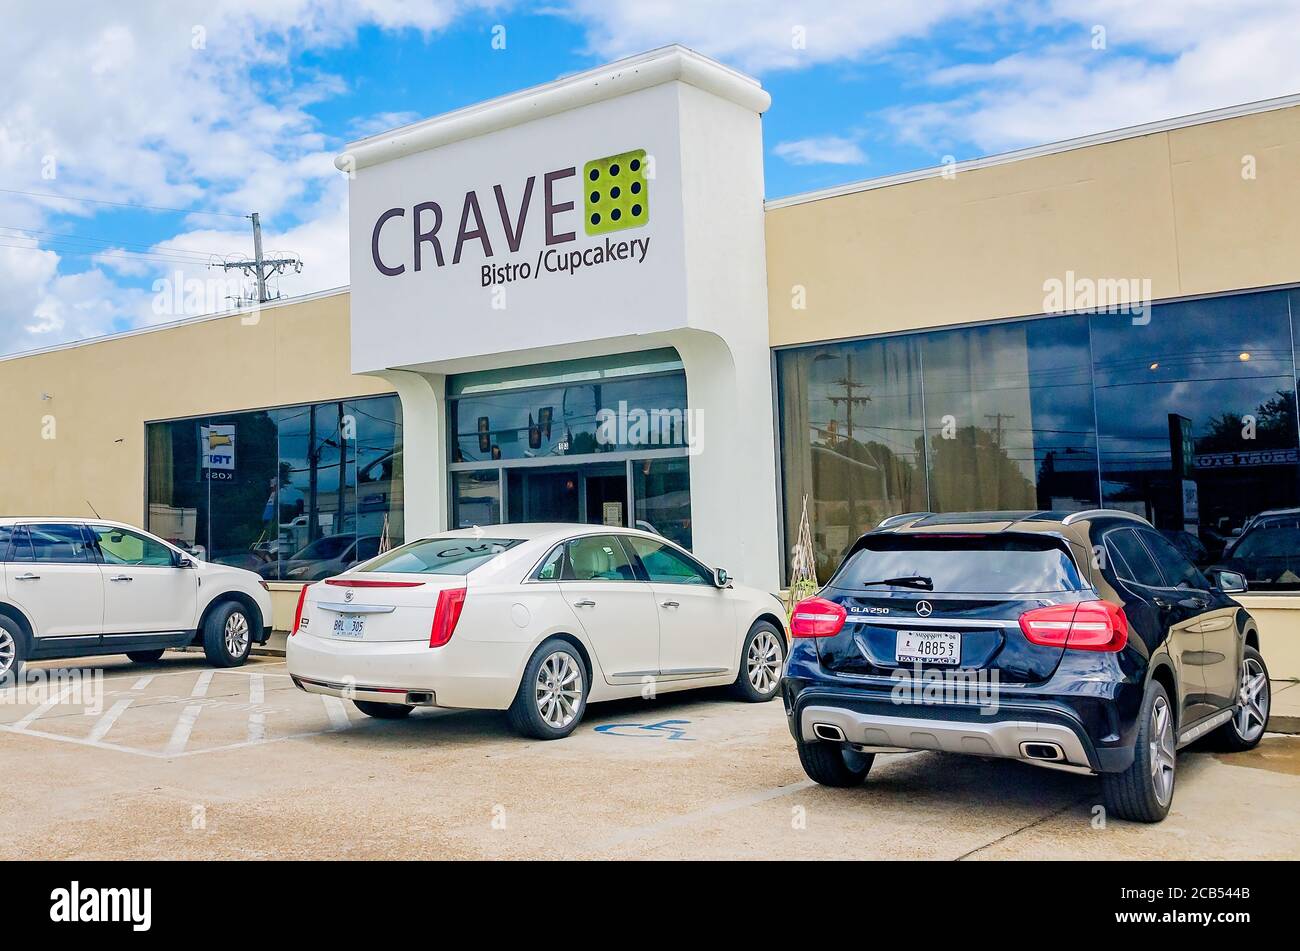 The exterior of Crave Bistro/Cupcakery is pictured, Aug. 12, 2016, in Cleveland, Mississippi. The bakery specializes in giant gourmet cupcakes. Stock Photo